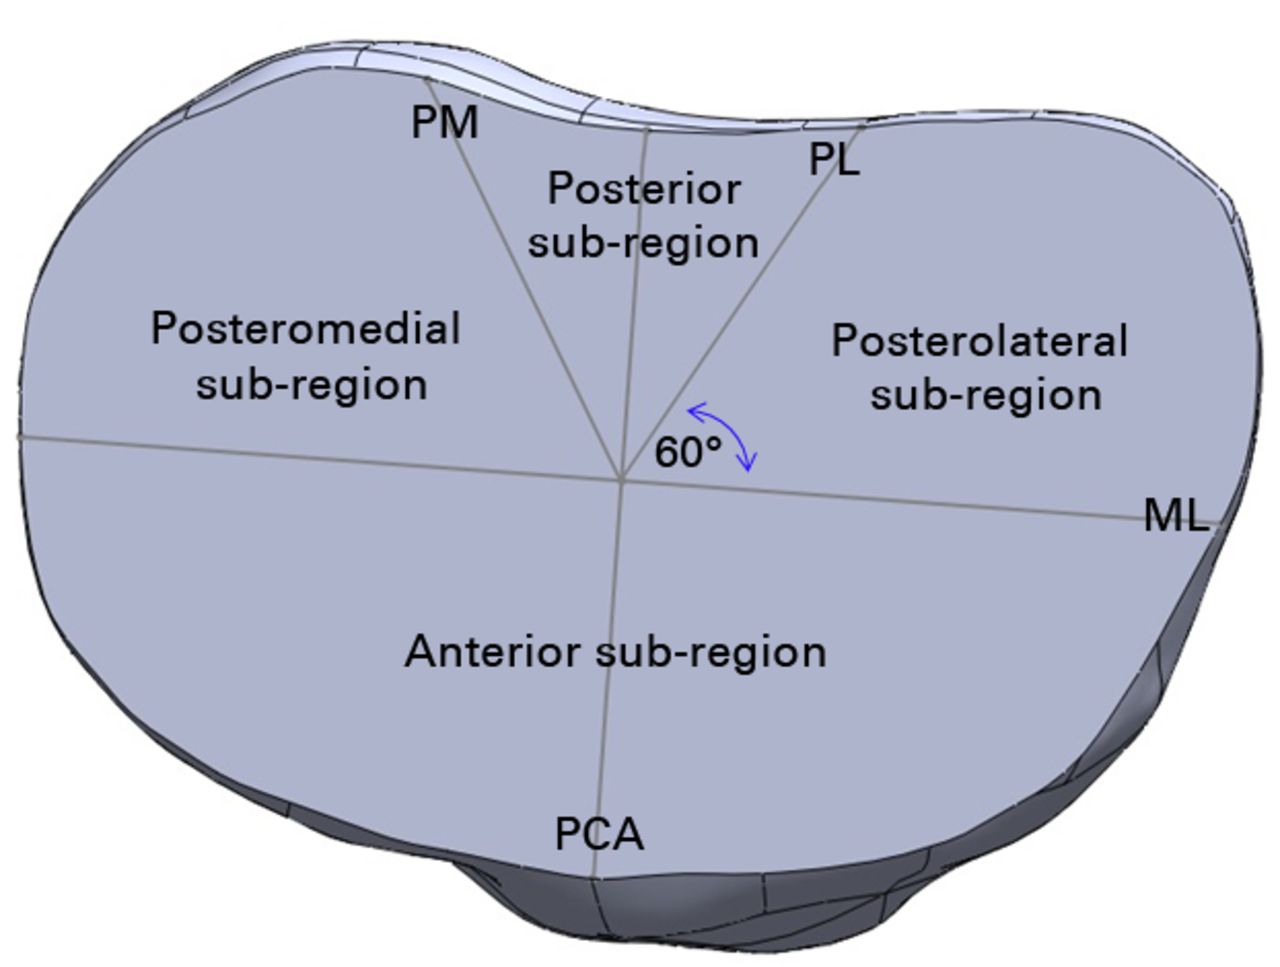 Fig. 3 
            Diagram showing the sub-regions of interest
(PM, posteromedial line; PL, posterolateral line, ML, mediolateral
line; PCA, posterior condylar axis).
          